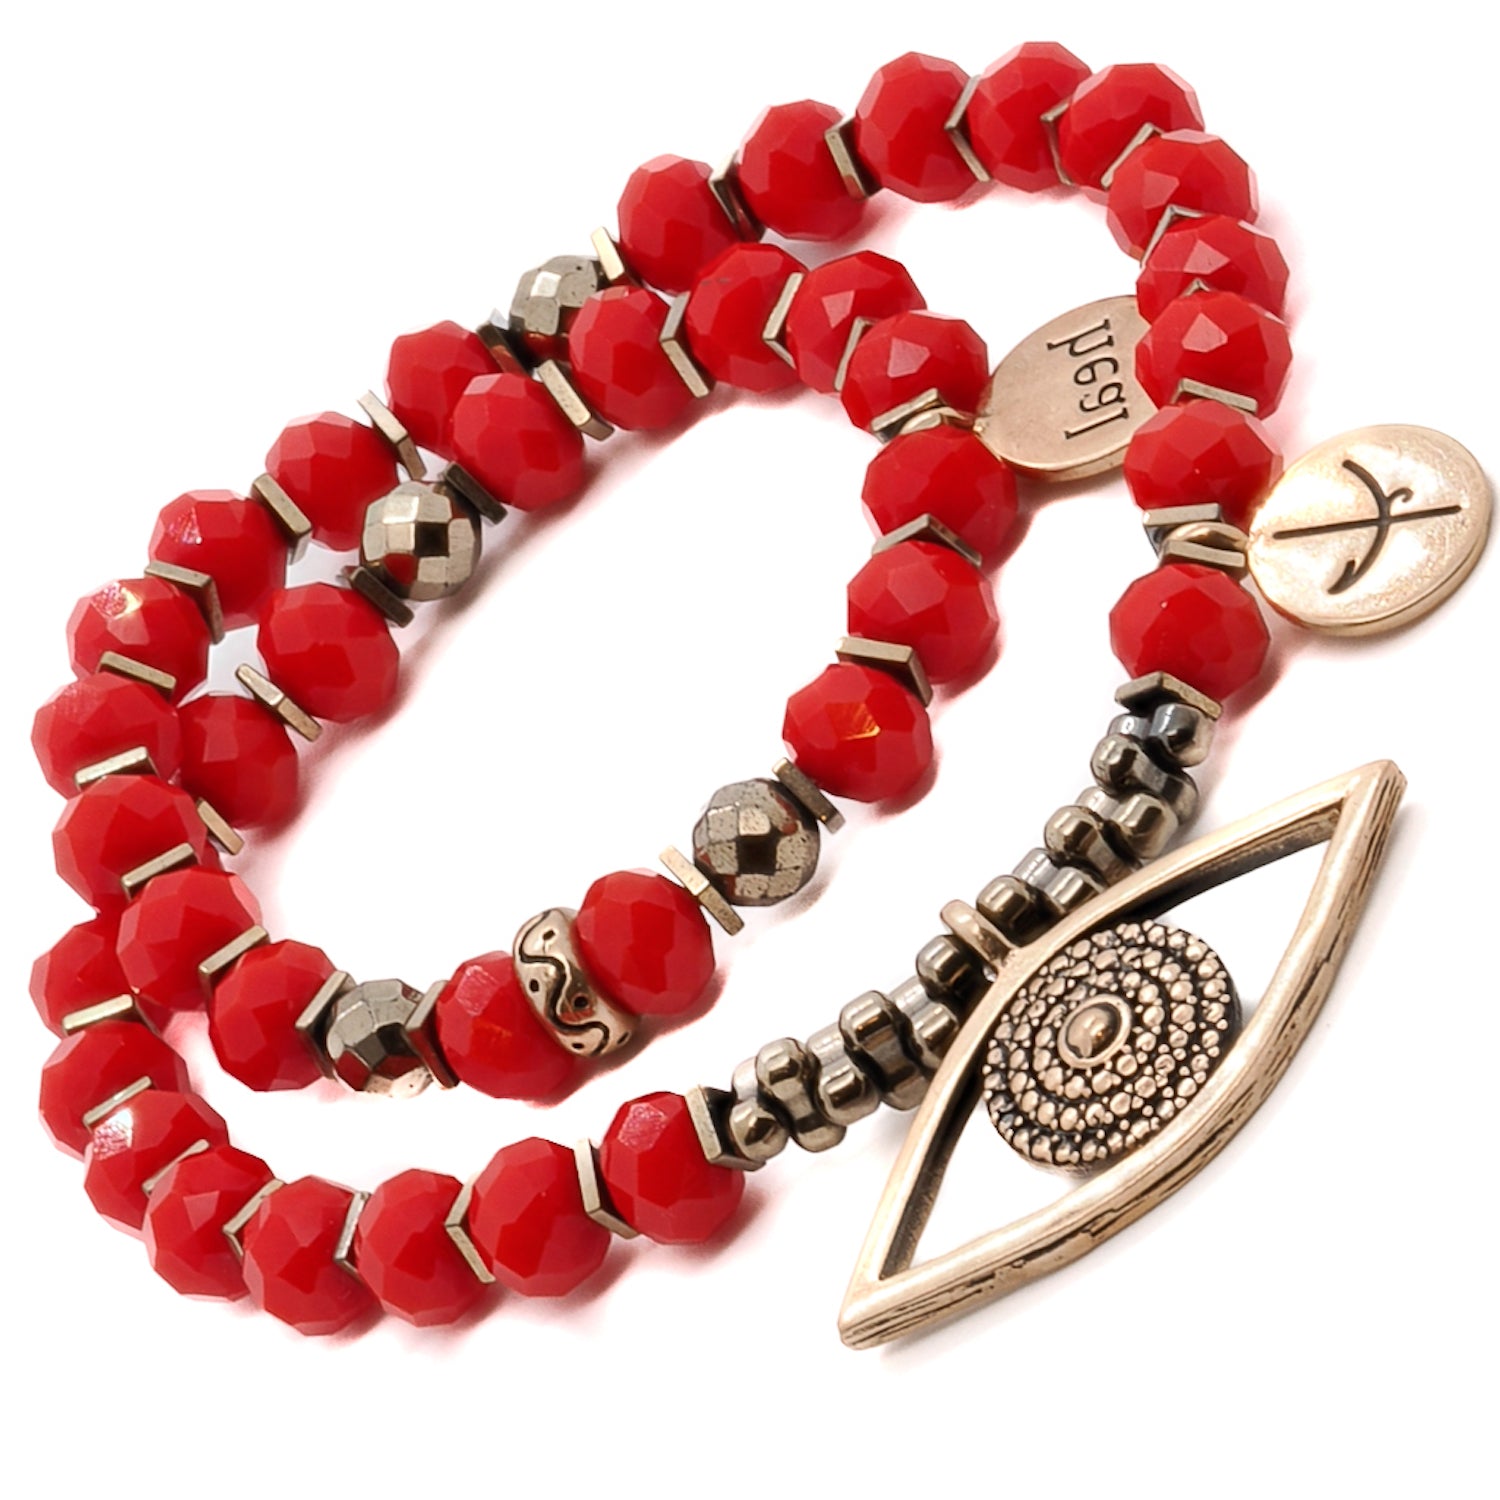 Handcrafted Evil Eye Bracelet with Red Crystal Beads: Each bracelet is meticulously handmade, ensuring a unique and meaningful piece that reflects your individuality.